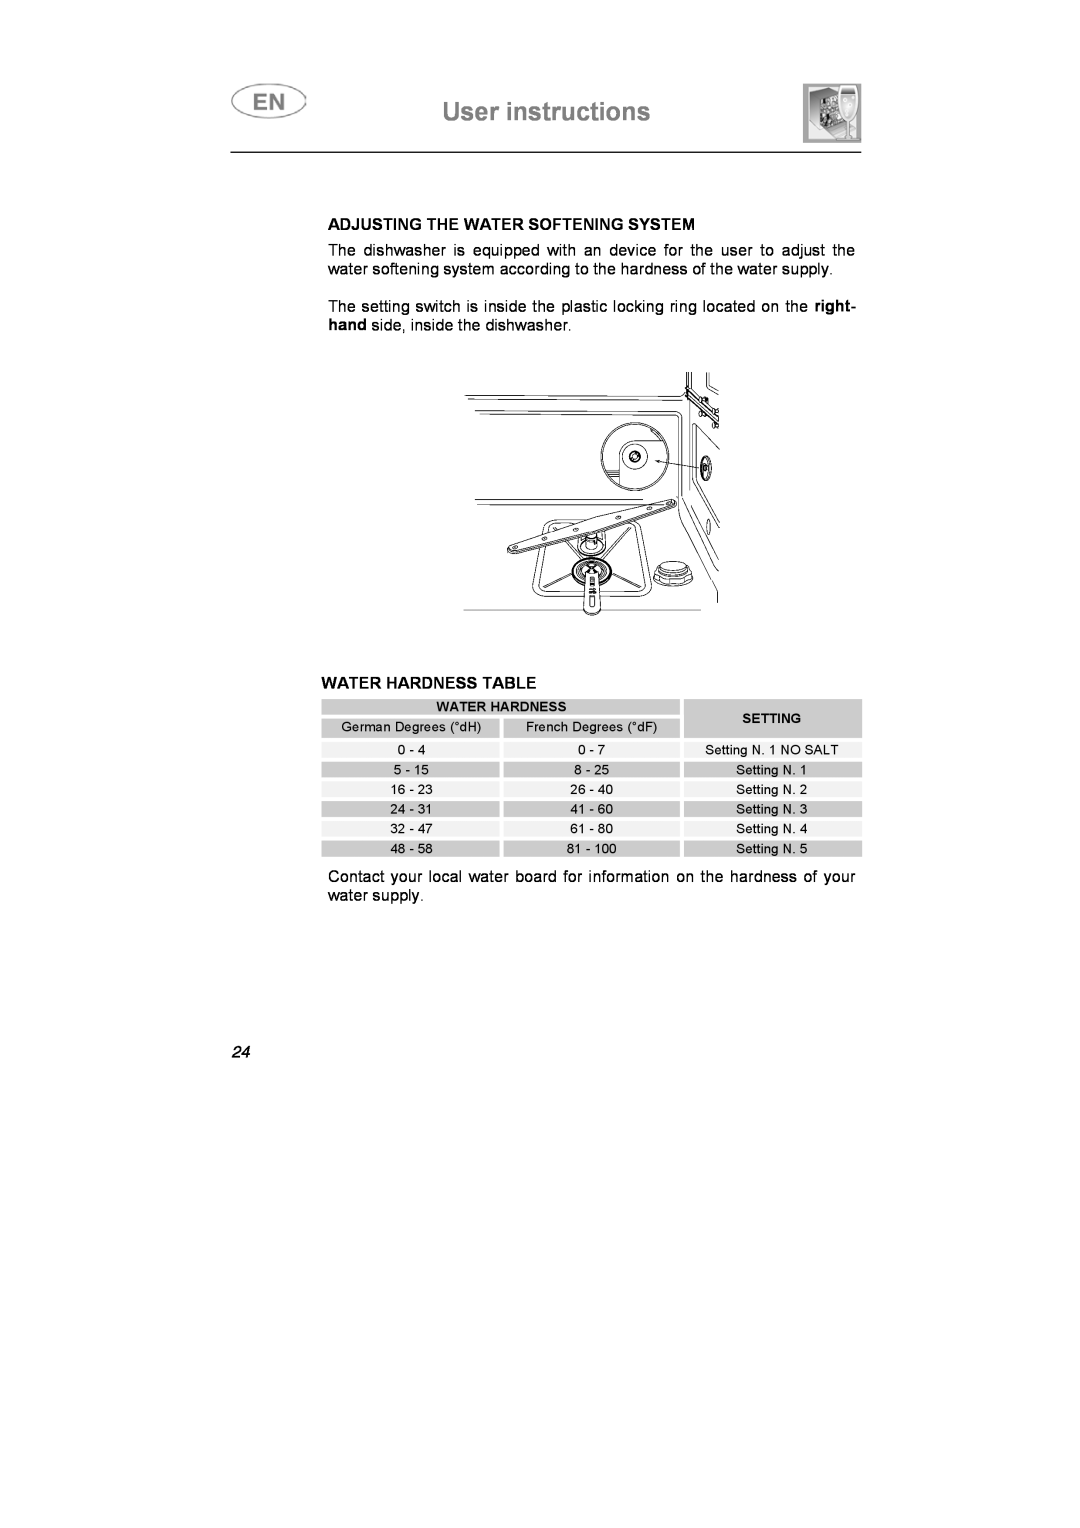 Smeg LS4647XH7 instruction manual User instructions, Adjusting The Water Softening System, Water Hardness Table 